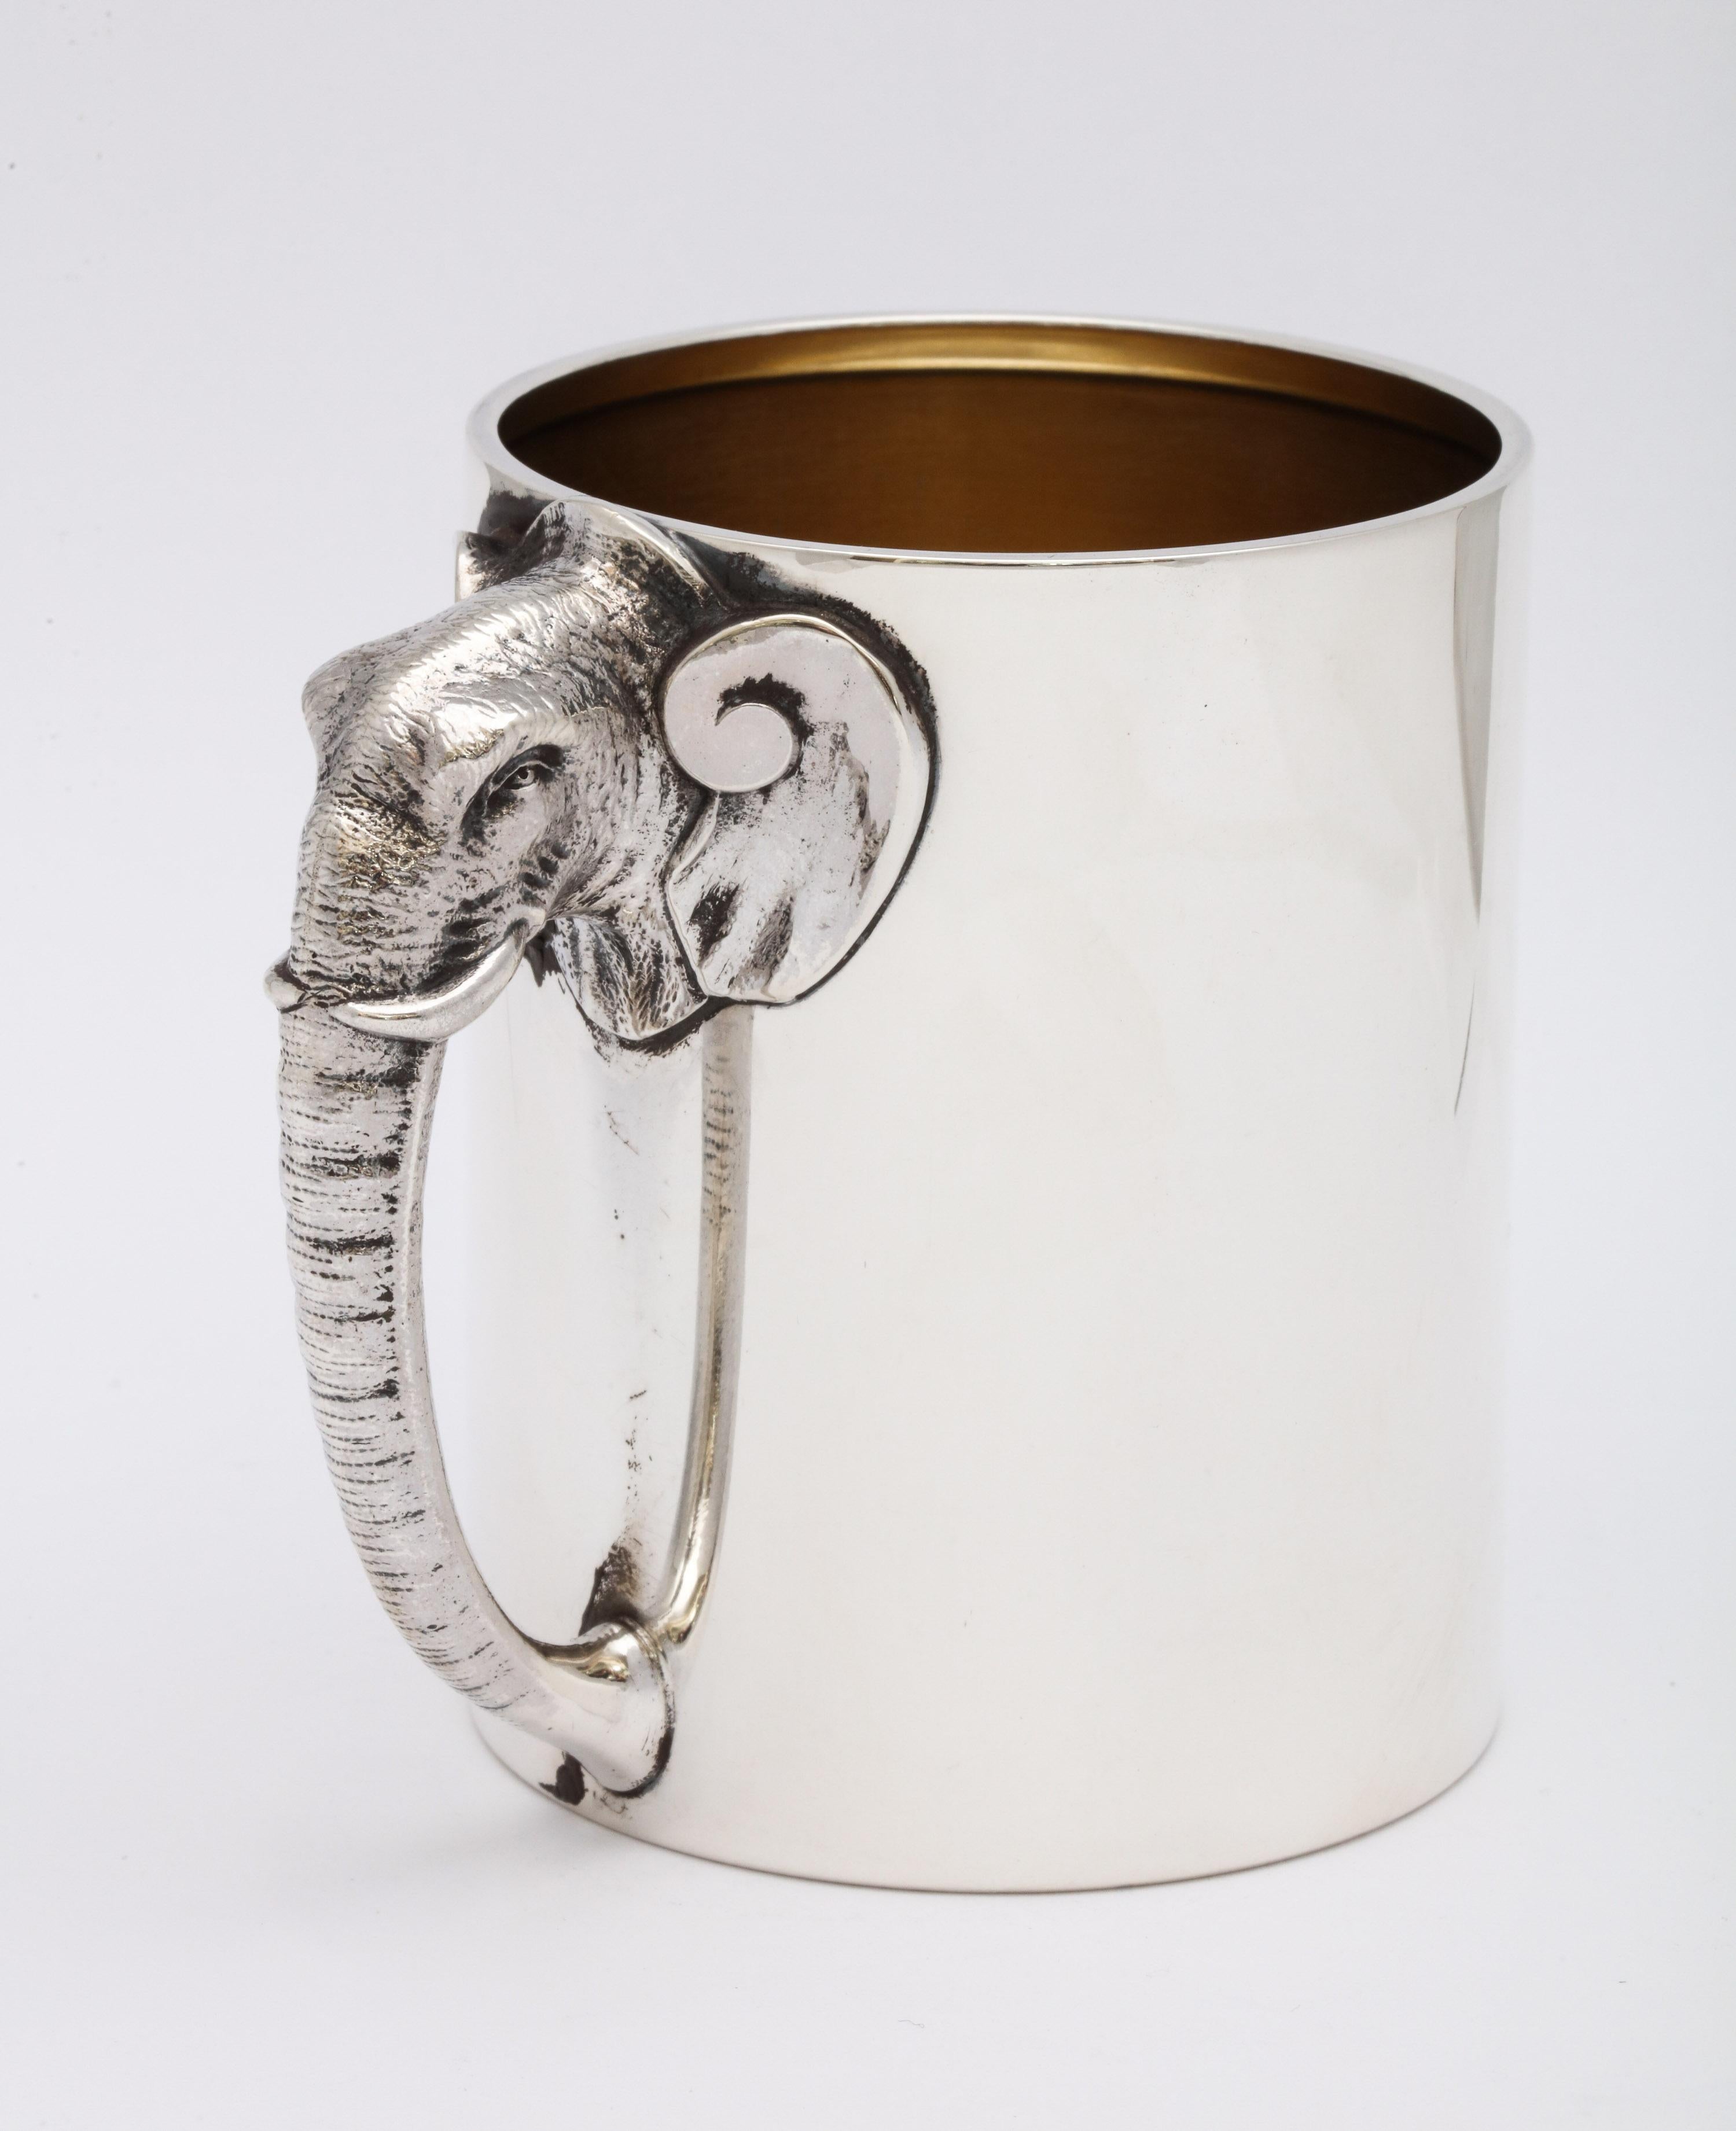 Gilt Rare Victorian Sterling Silver Mug/Cup with Elephant-Form Handle by Gorham